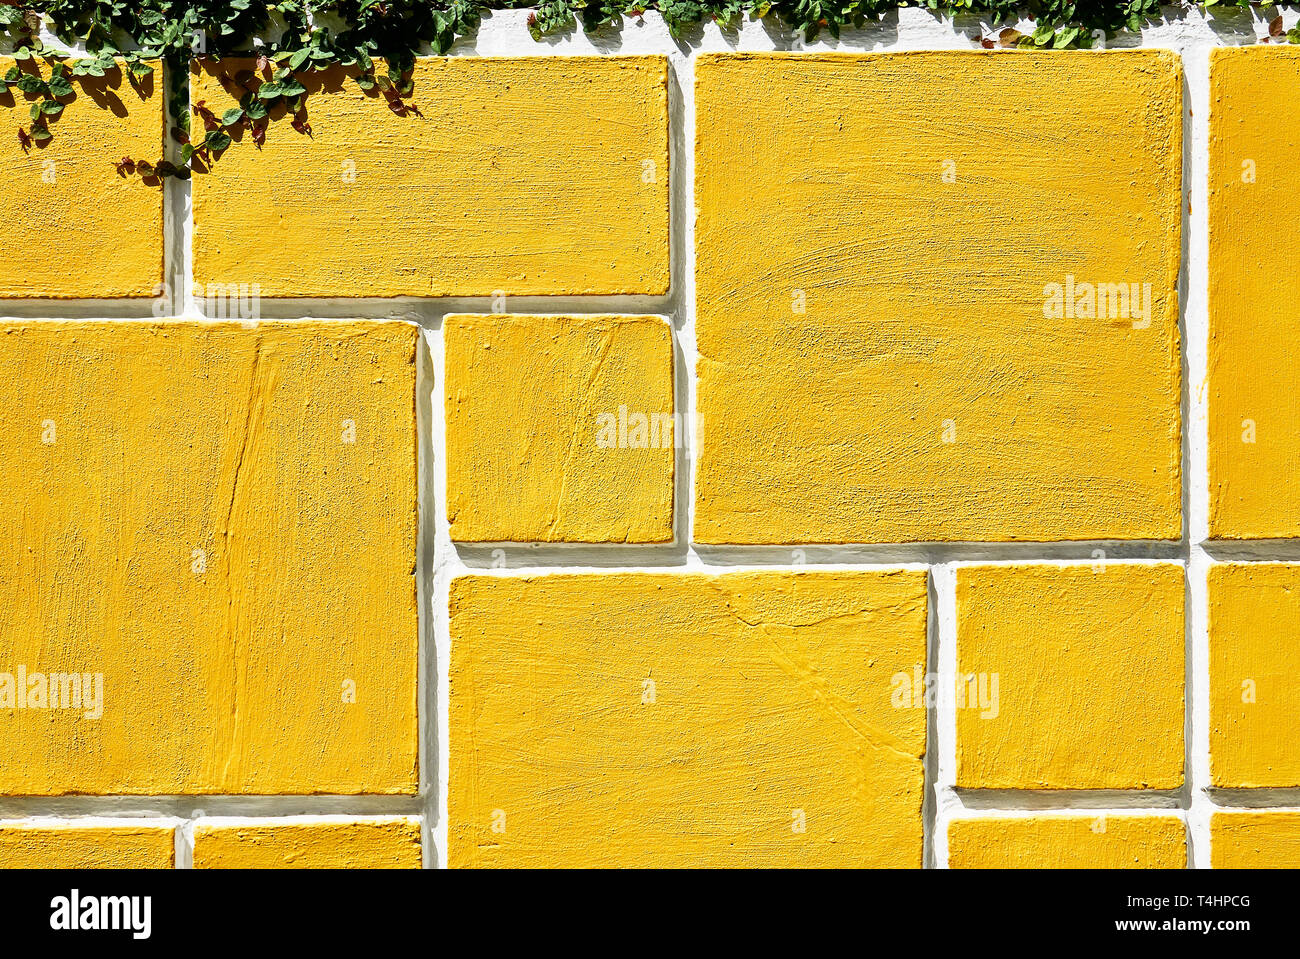 Detail of a rectangle shaped grid design of a concrete garden wall fence painted in bright yellow. Green plants hanging from the top of the wall. Stock Photo